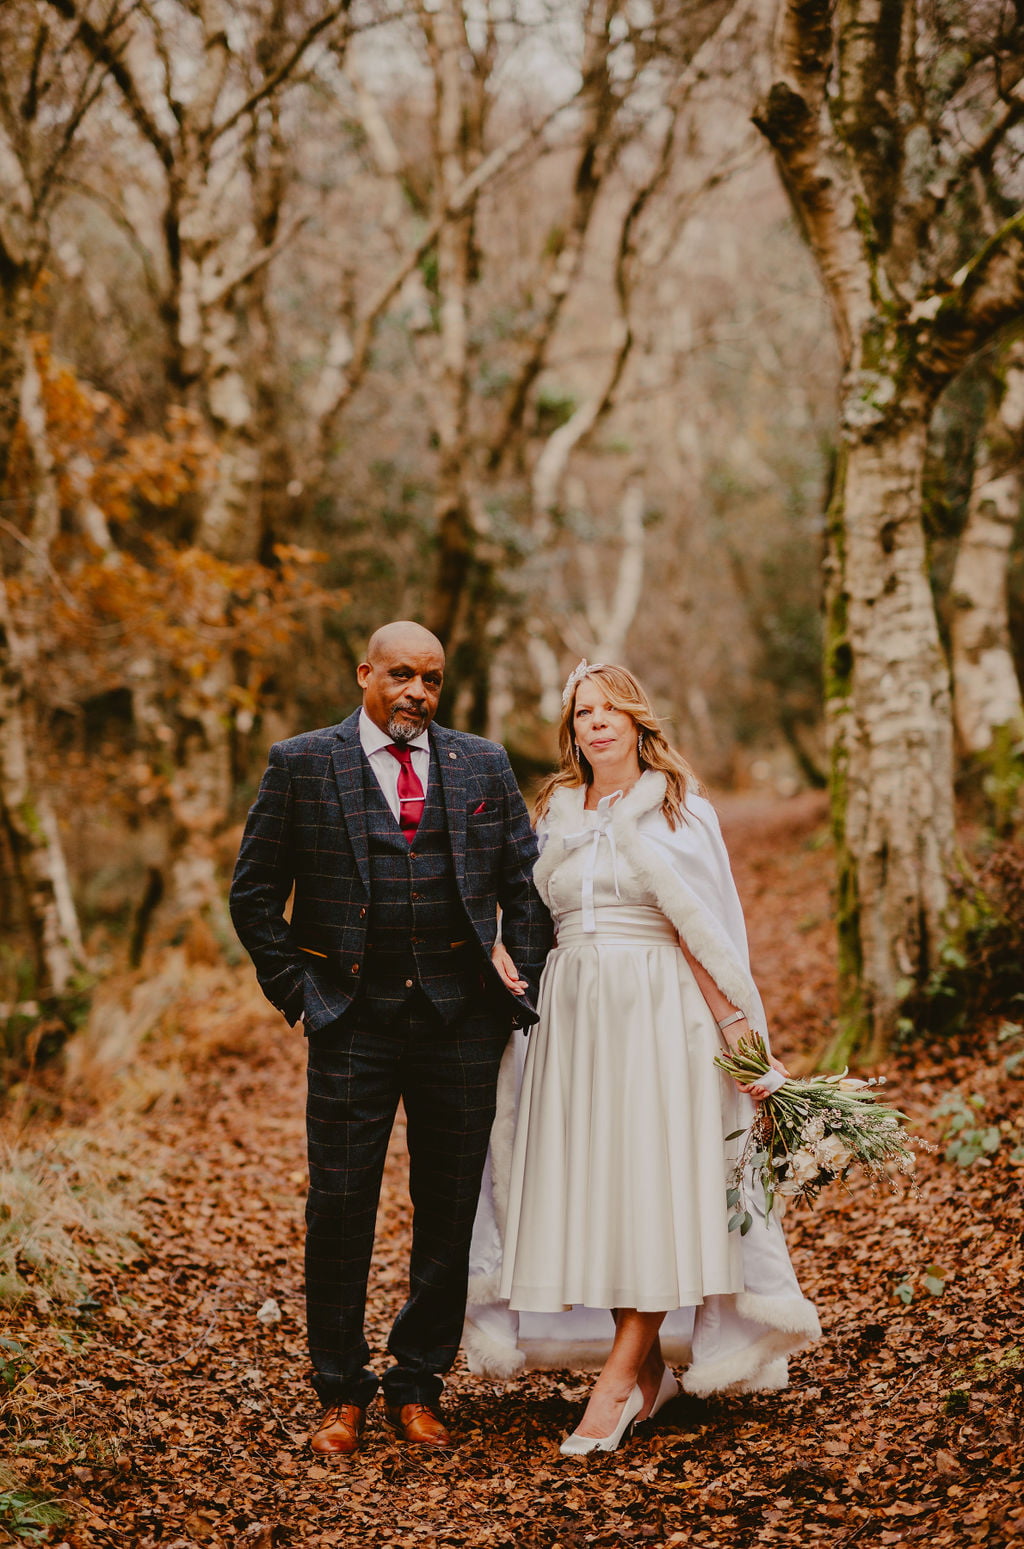 man and woman stood in the woods holding a wedding bouquet